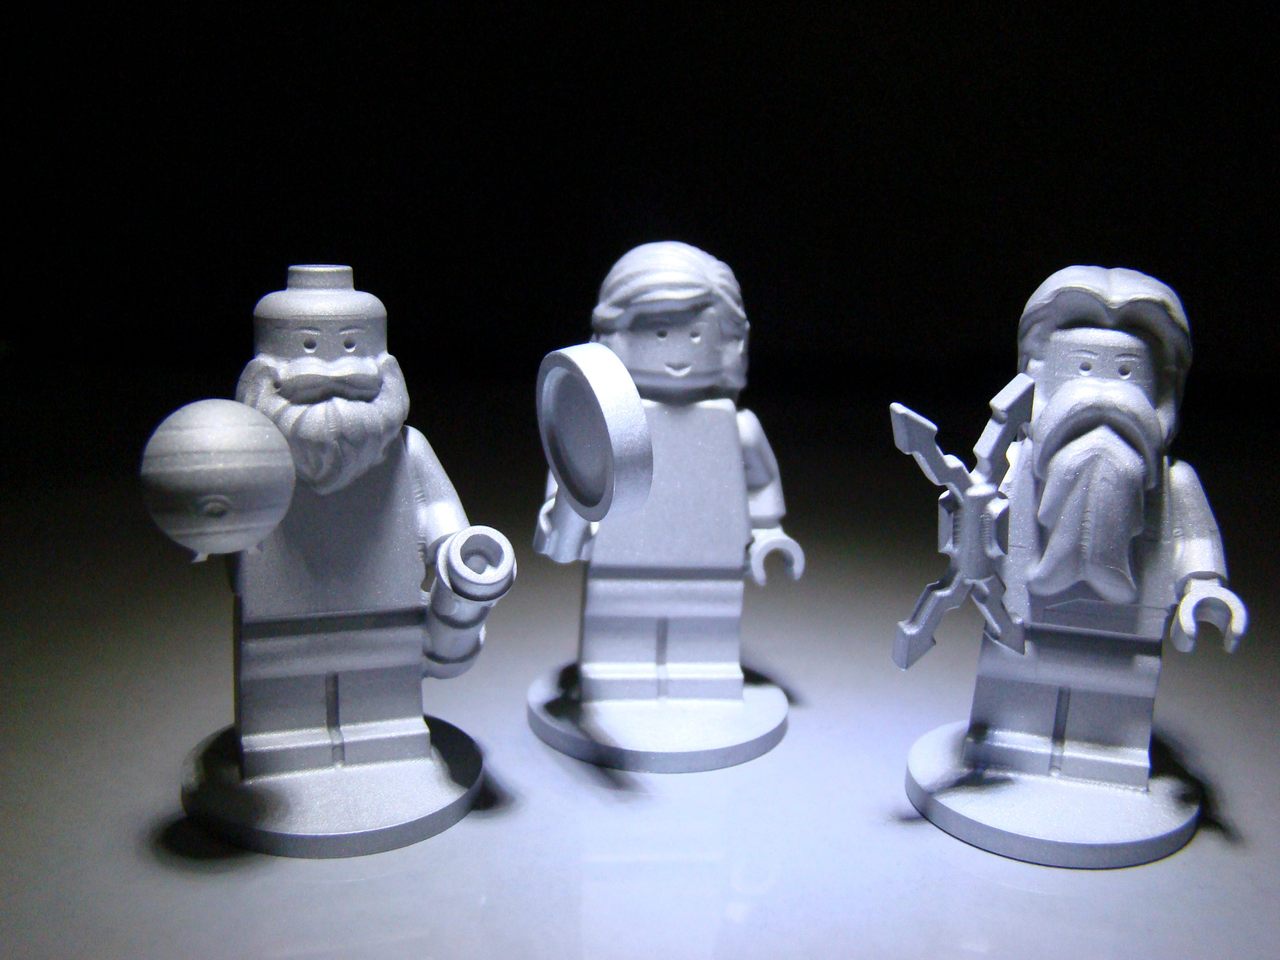 The models of three Lego figurines sent with the Juno spacecraft are Galileo Galilei and the Roman gods Juno and Jupiter.